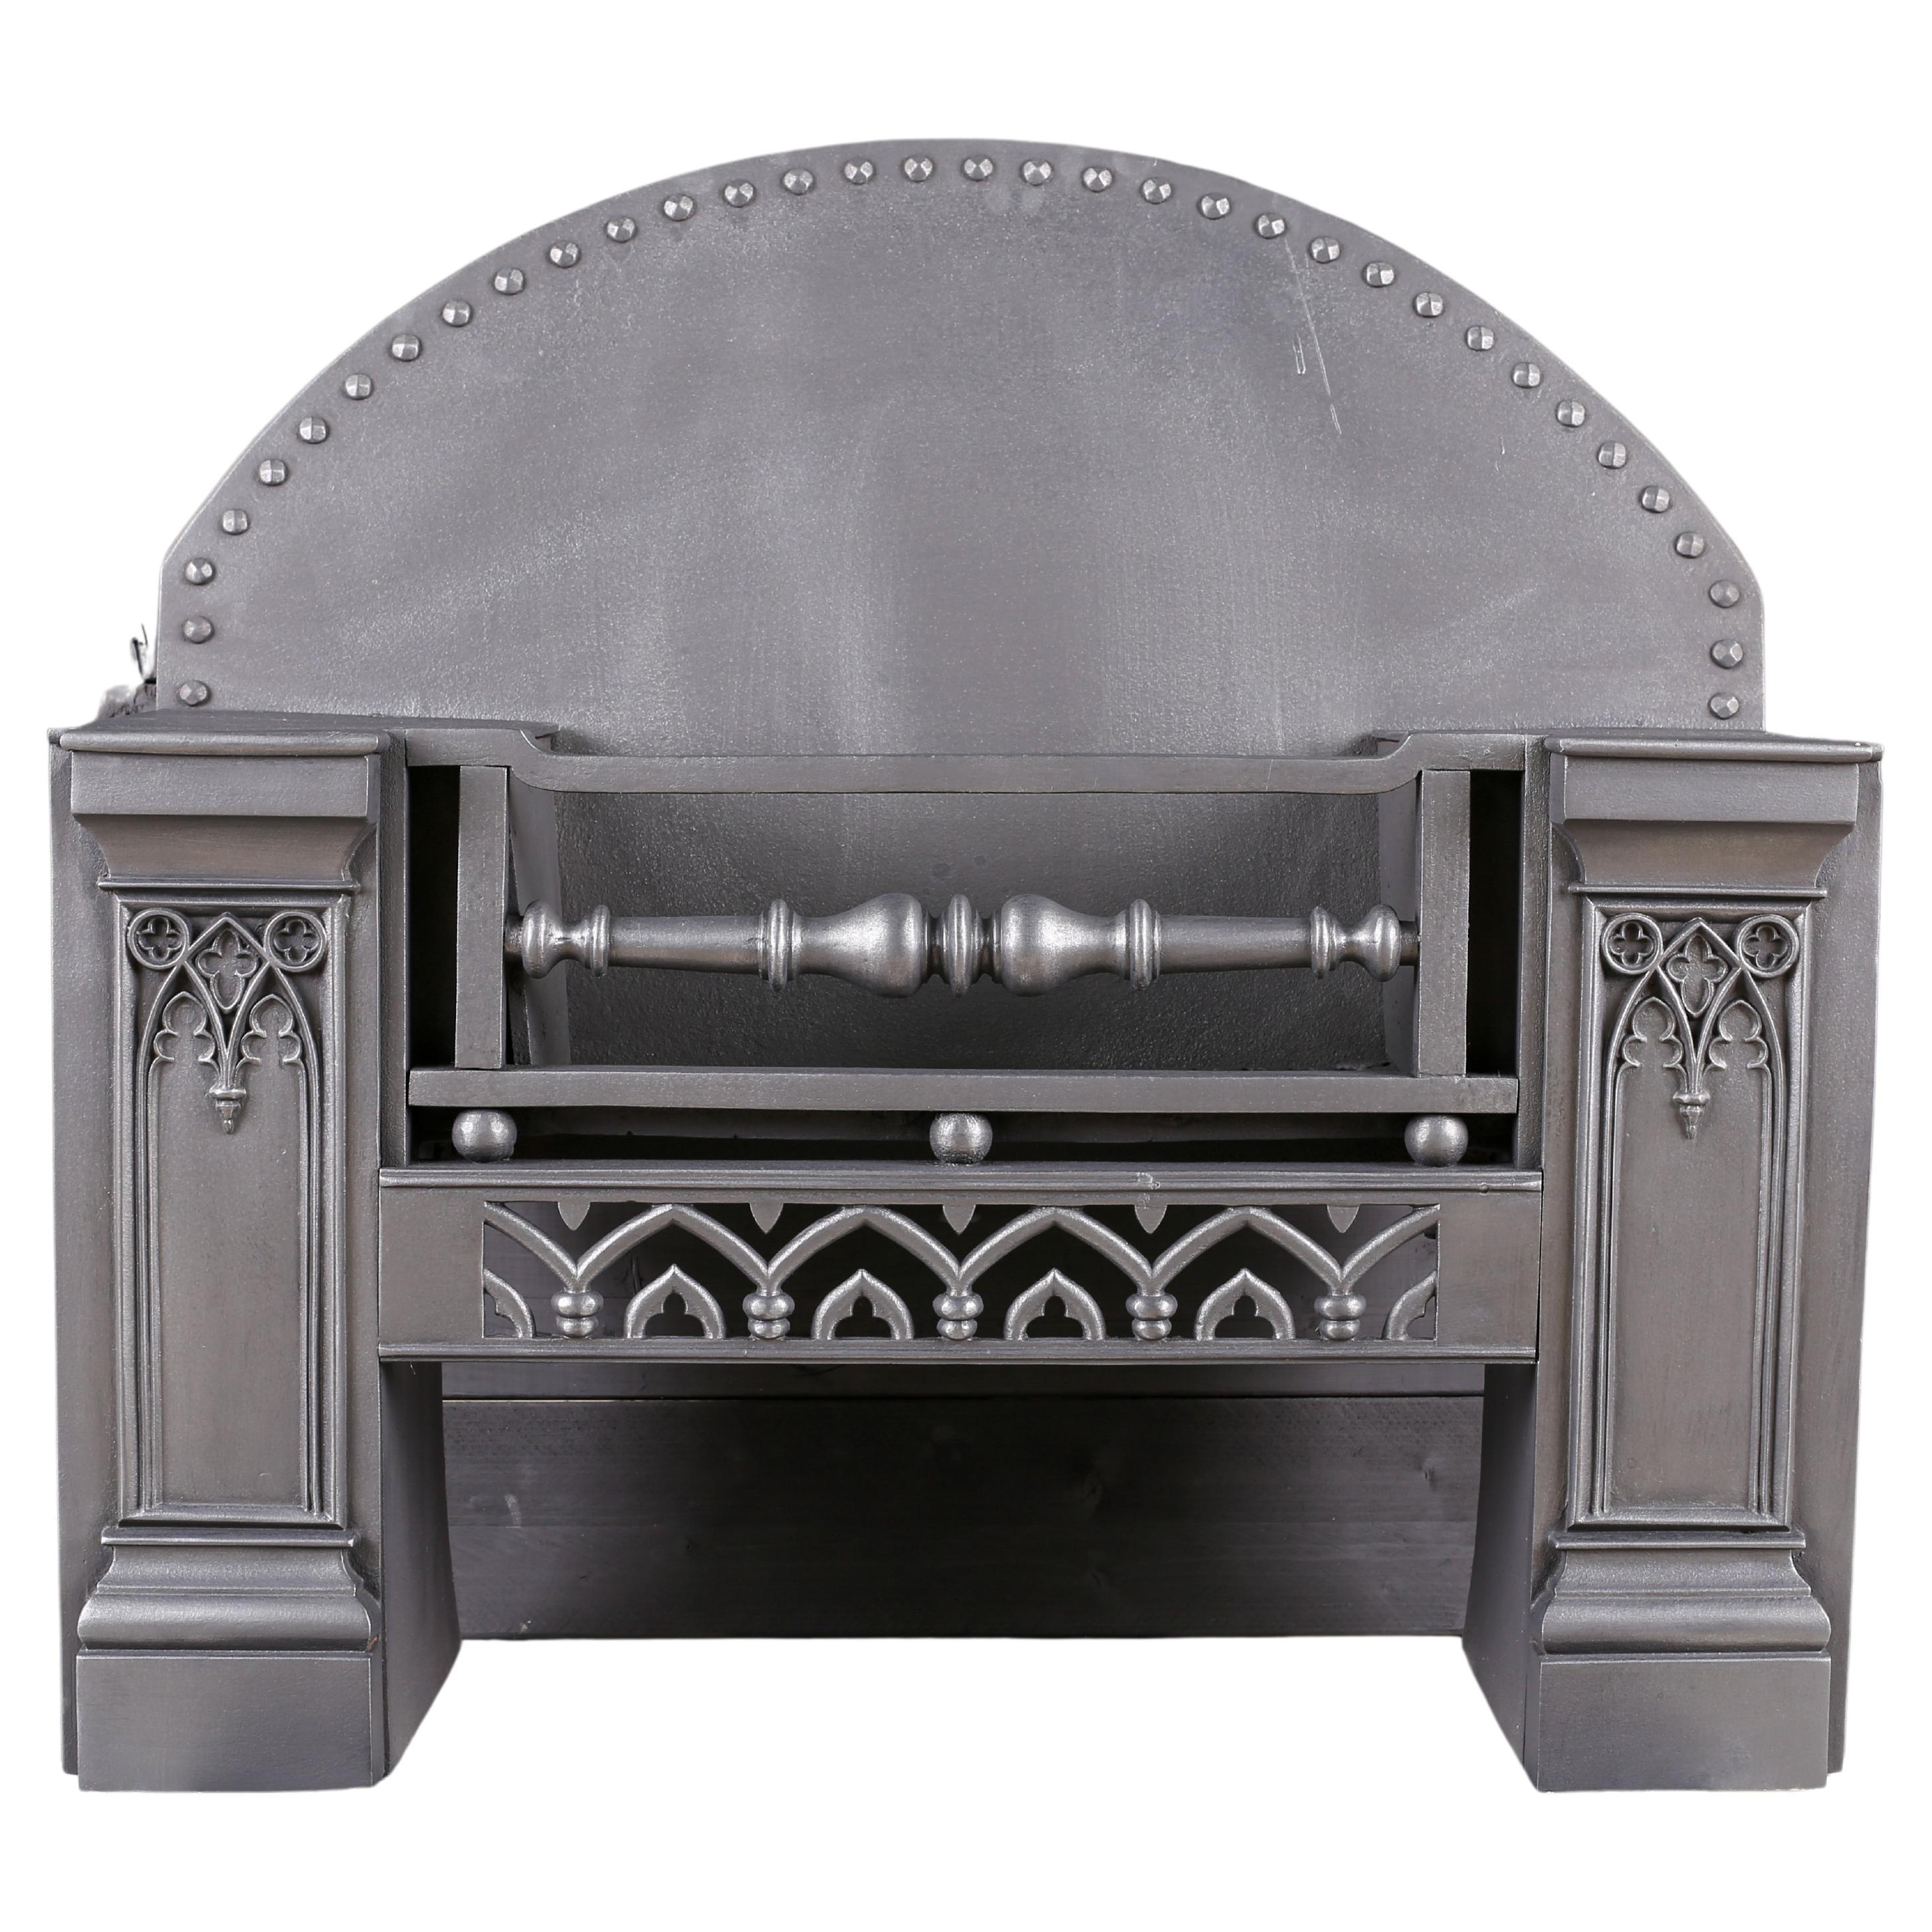 Grand Cast Iron Victorian Gothic Revival Hob Grate Fireplace, English, C.1860